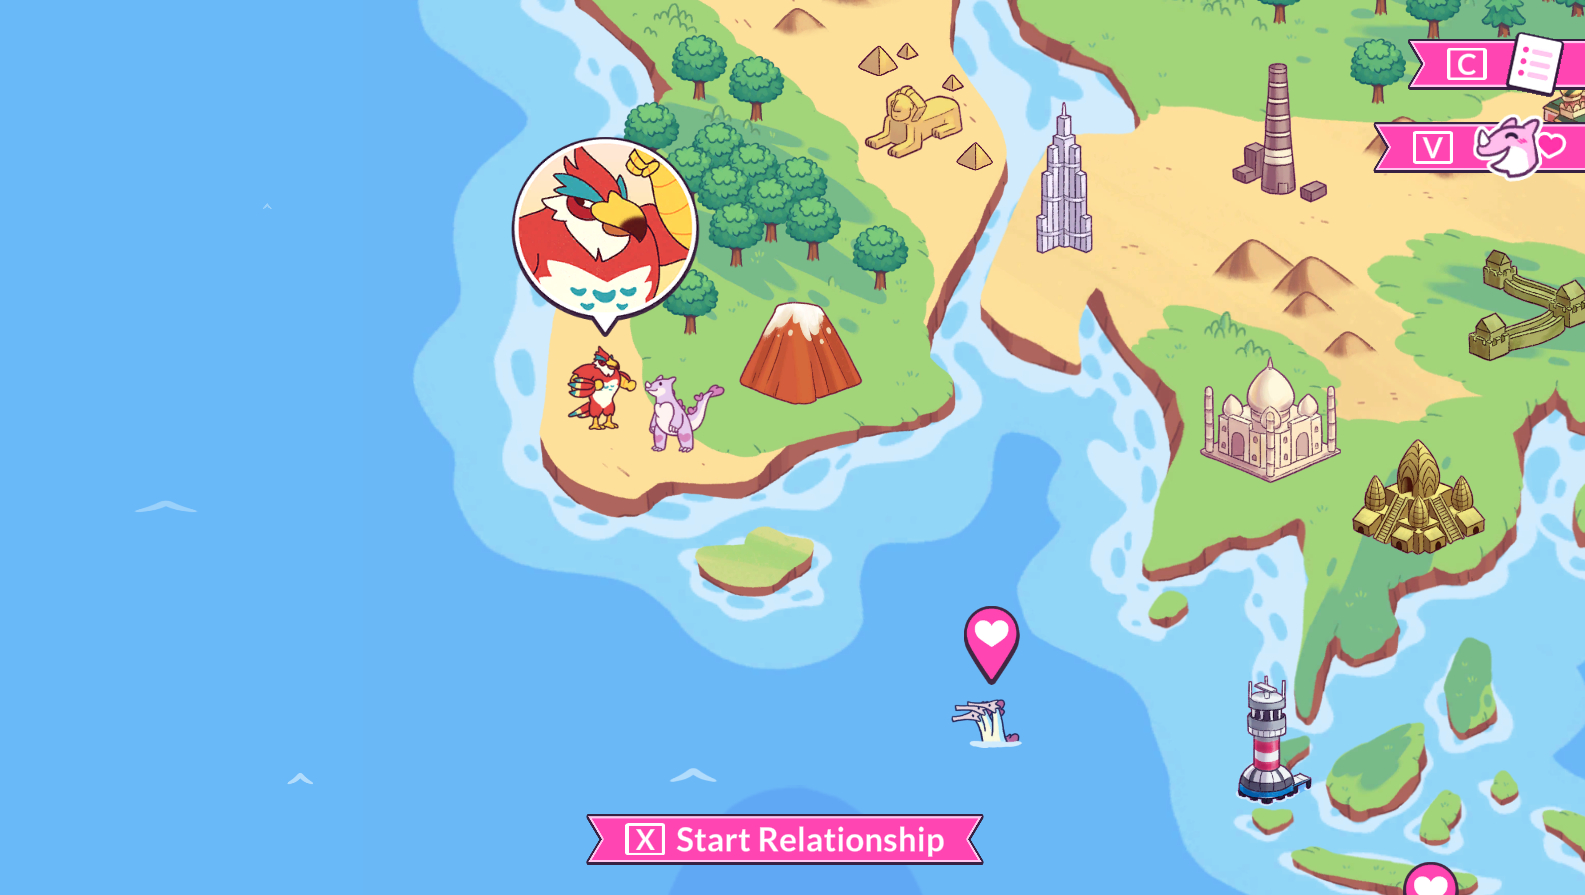 Screenshot from Kaichu - A Kaiju Dating Sim. A rendering of a bird's-eye view of map. Miniature renderings of monuments and landmarks are peppered around the map. The two small figures of a bird-like humanoid and a reptilian creature stand on one of the land masses. A pink-colored button "Start Relationship" sits at the bottom of the image.